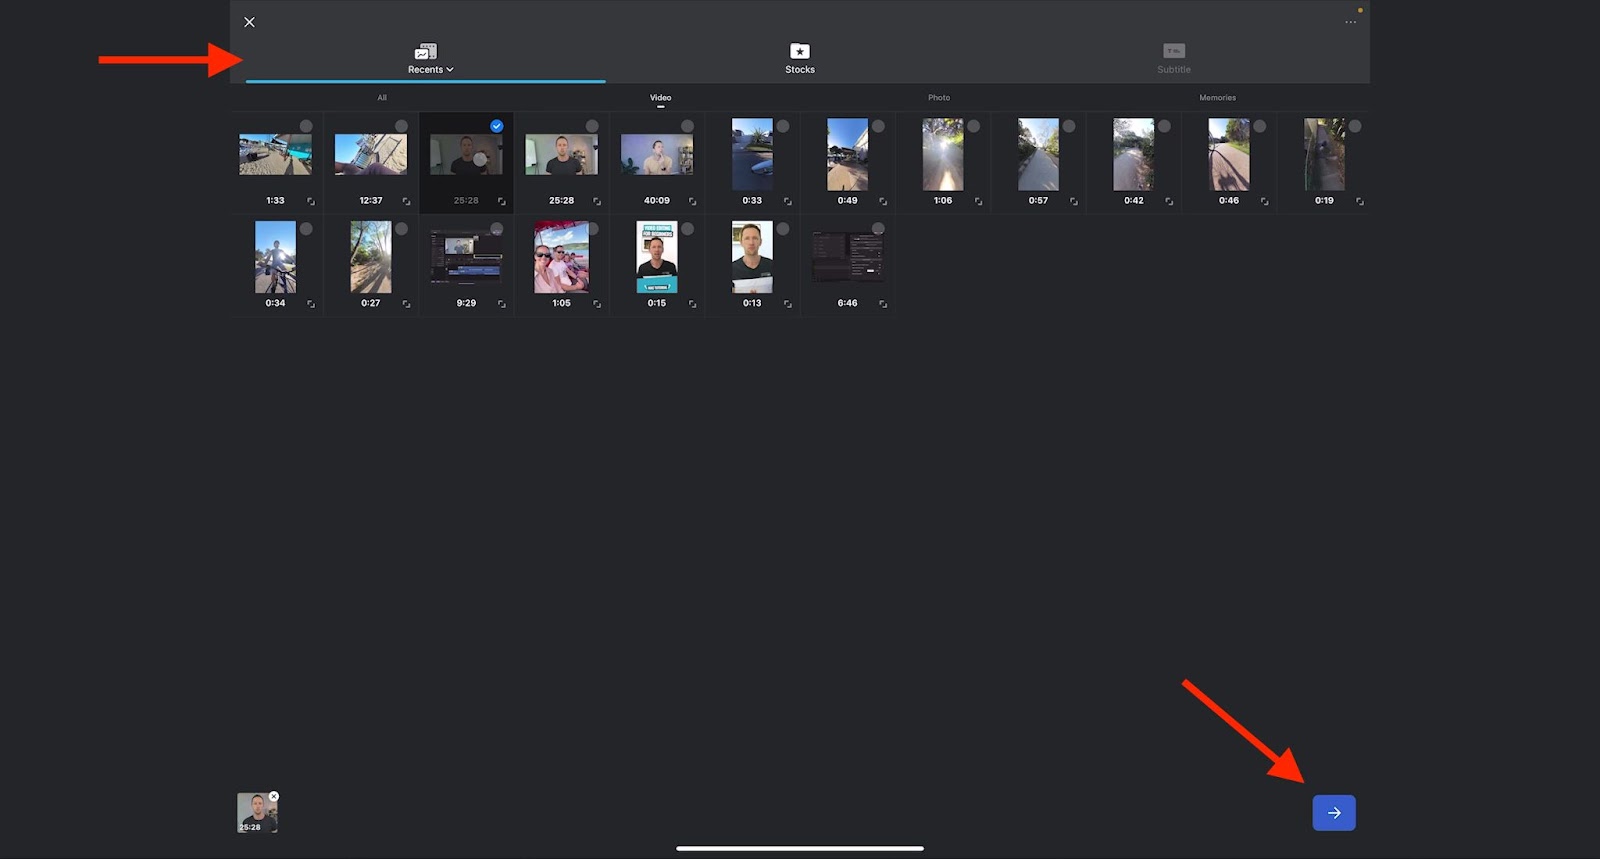 VN Video Editor importing clips interface with Recents, Stocks, Subtitle tabs and a 'Next' button with an arrow pointing to the right as a symbol